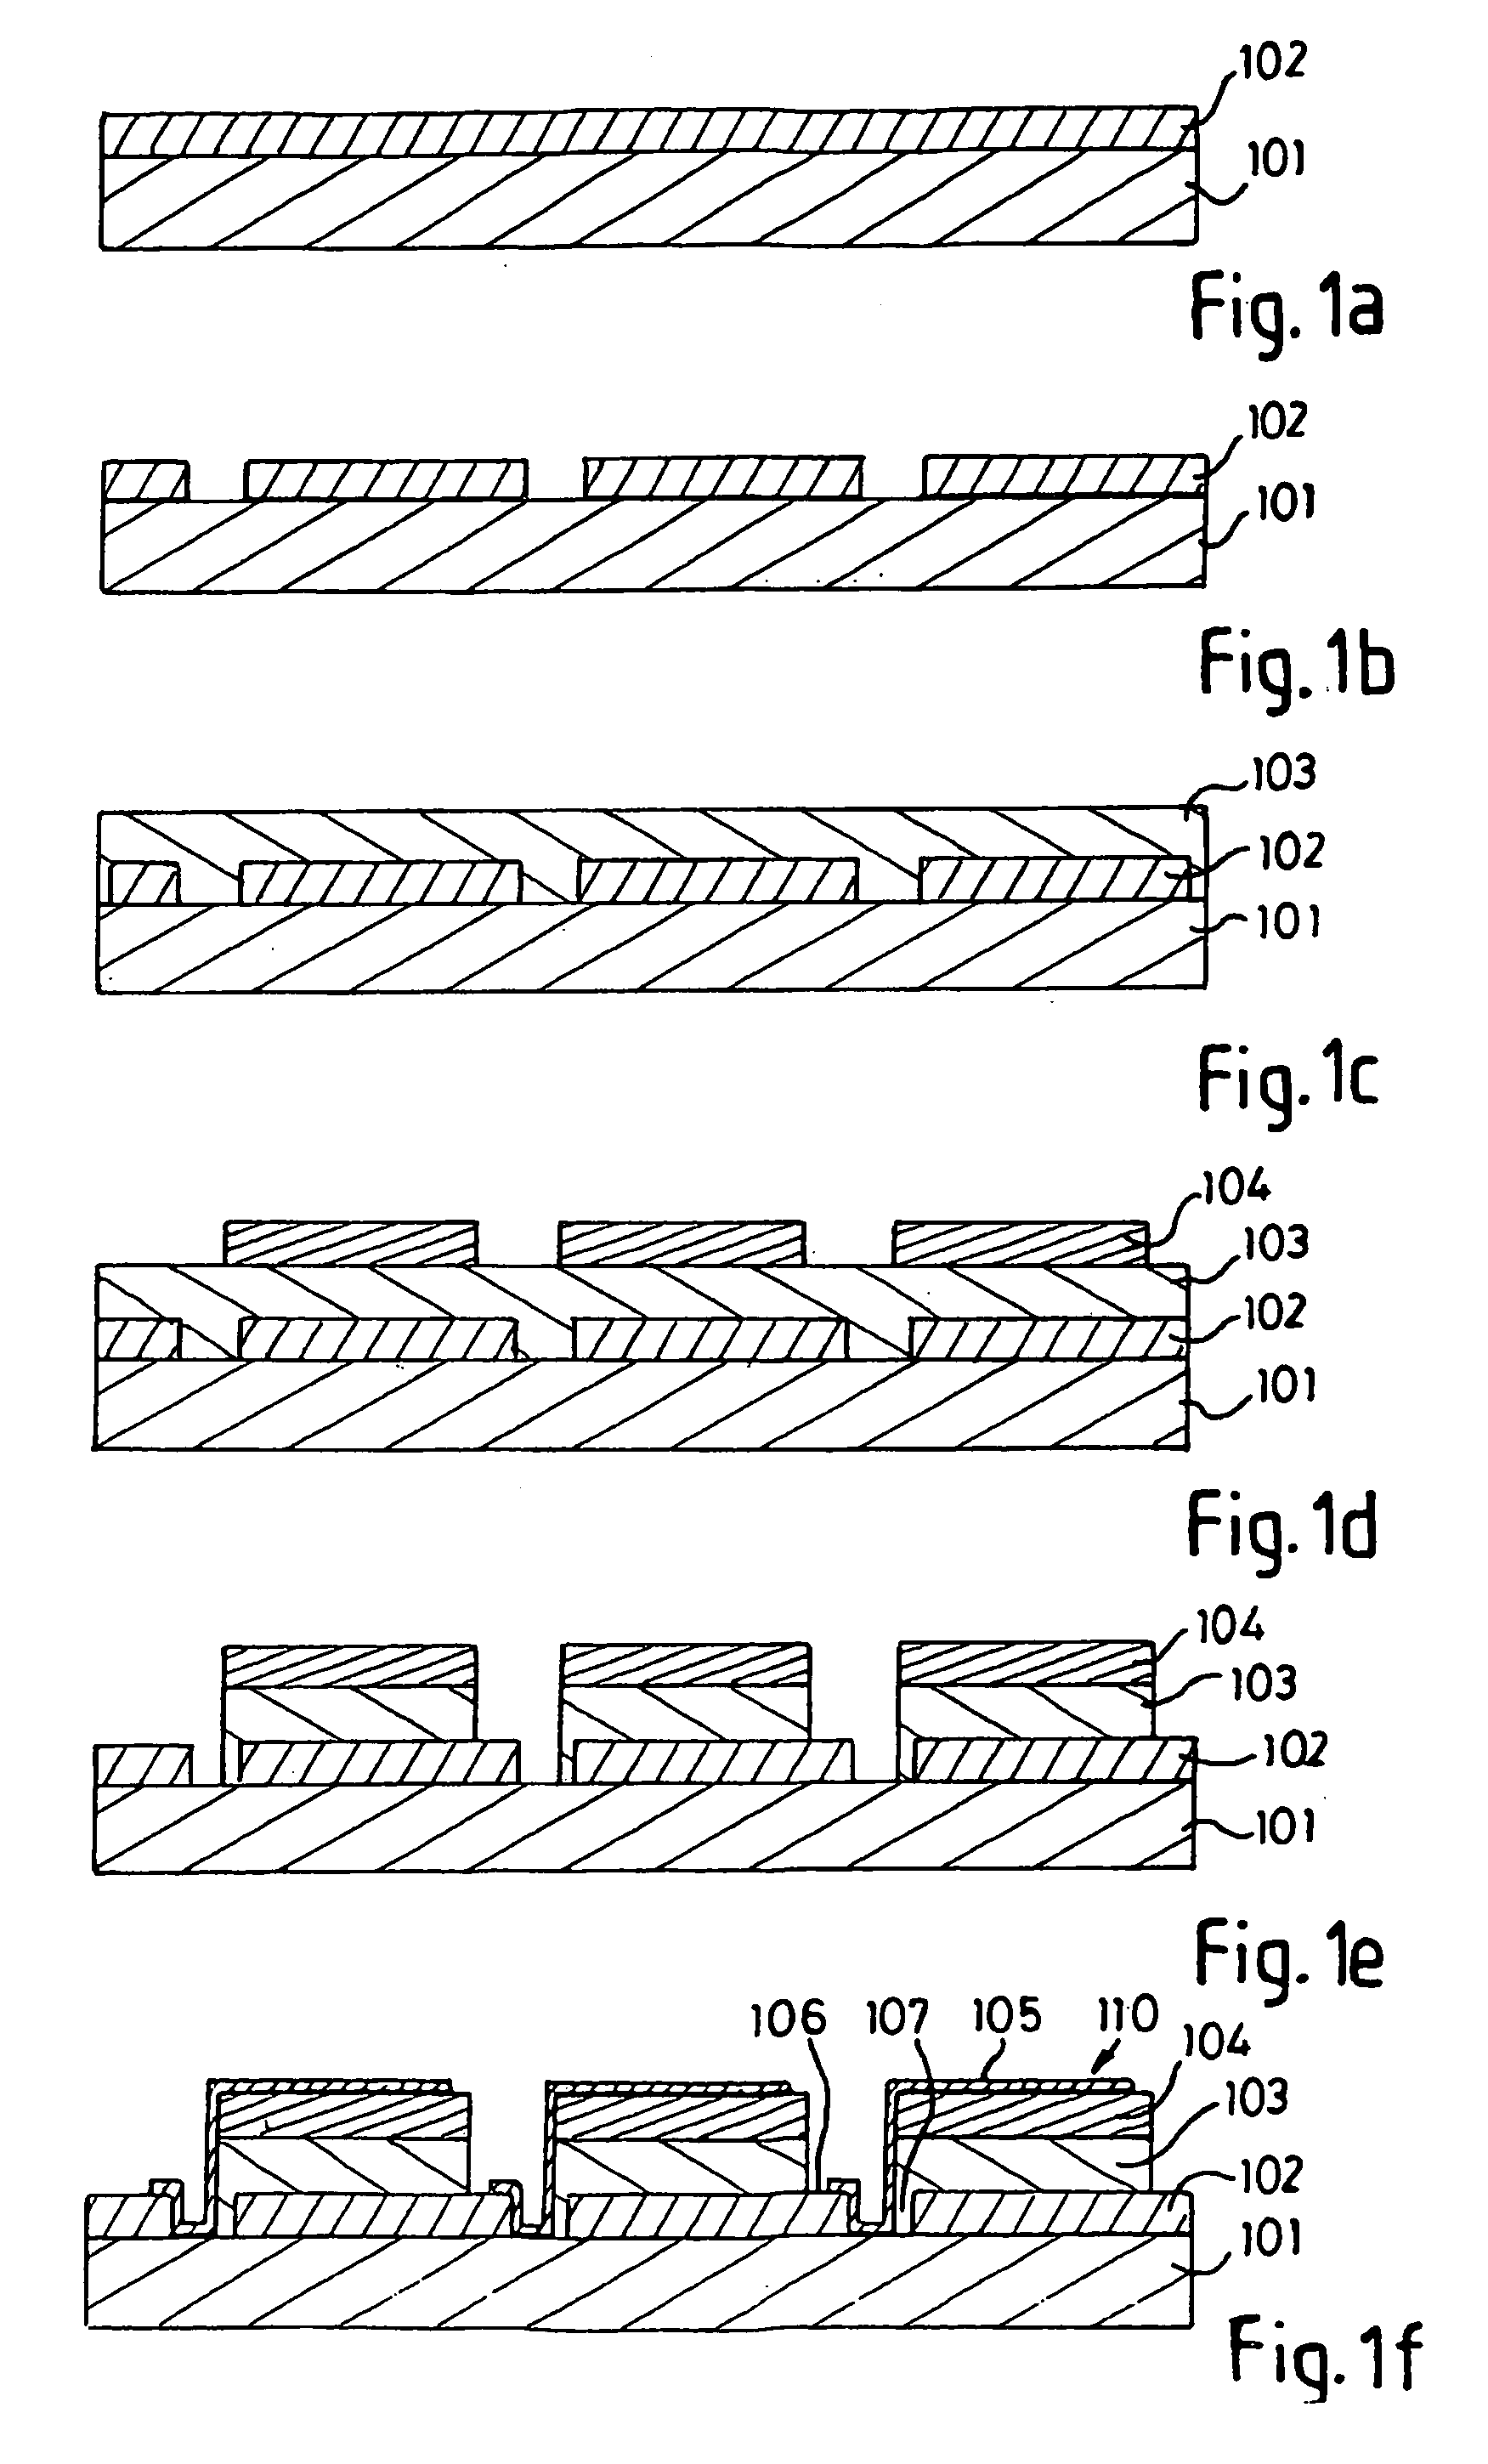 Electrical connection of optoelectronic devices